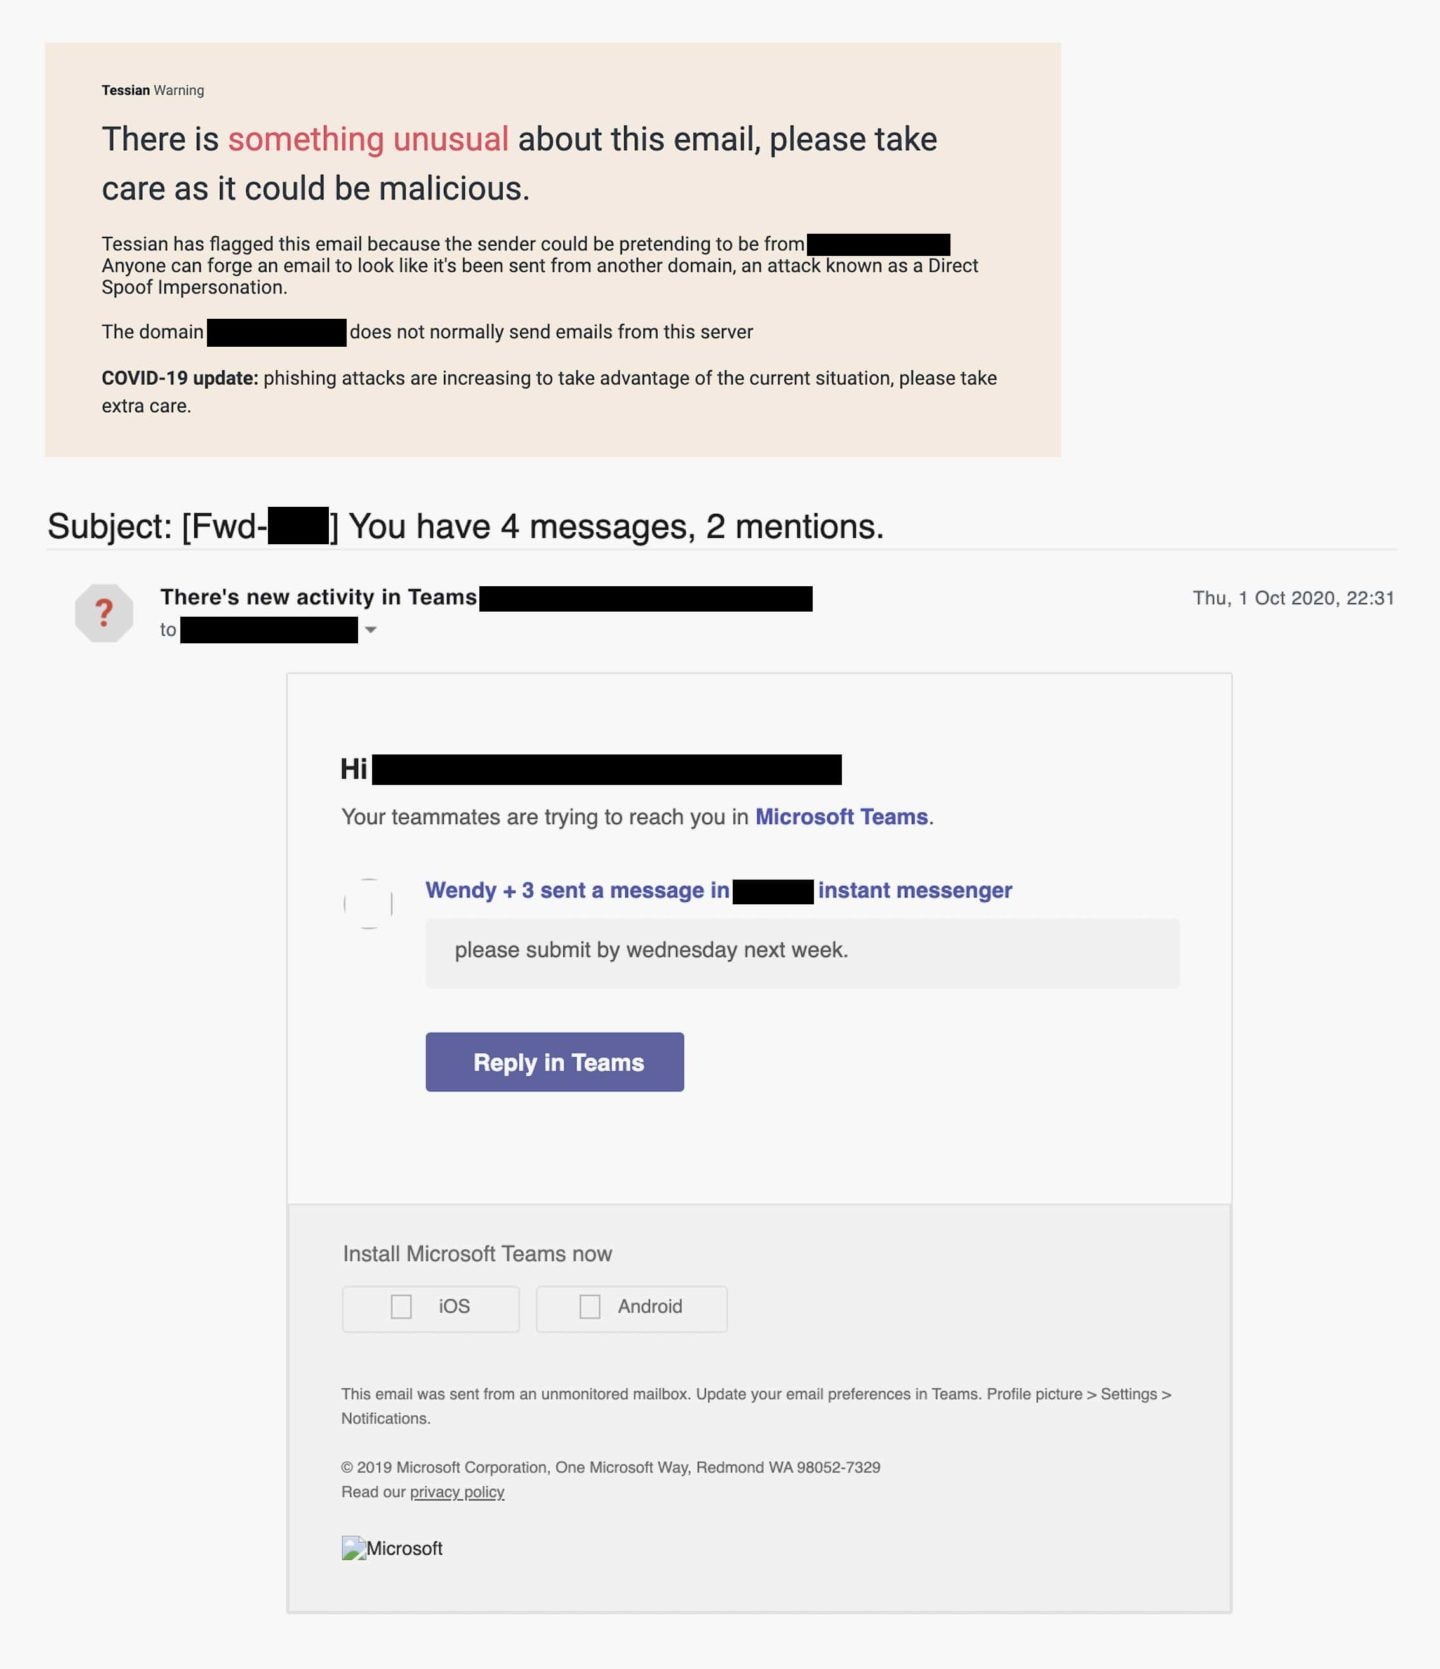 This is an example of a spear phishing email. The attacker is impersonating is leveraging a fake Microsoft Teams notification